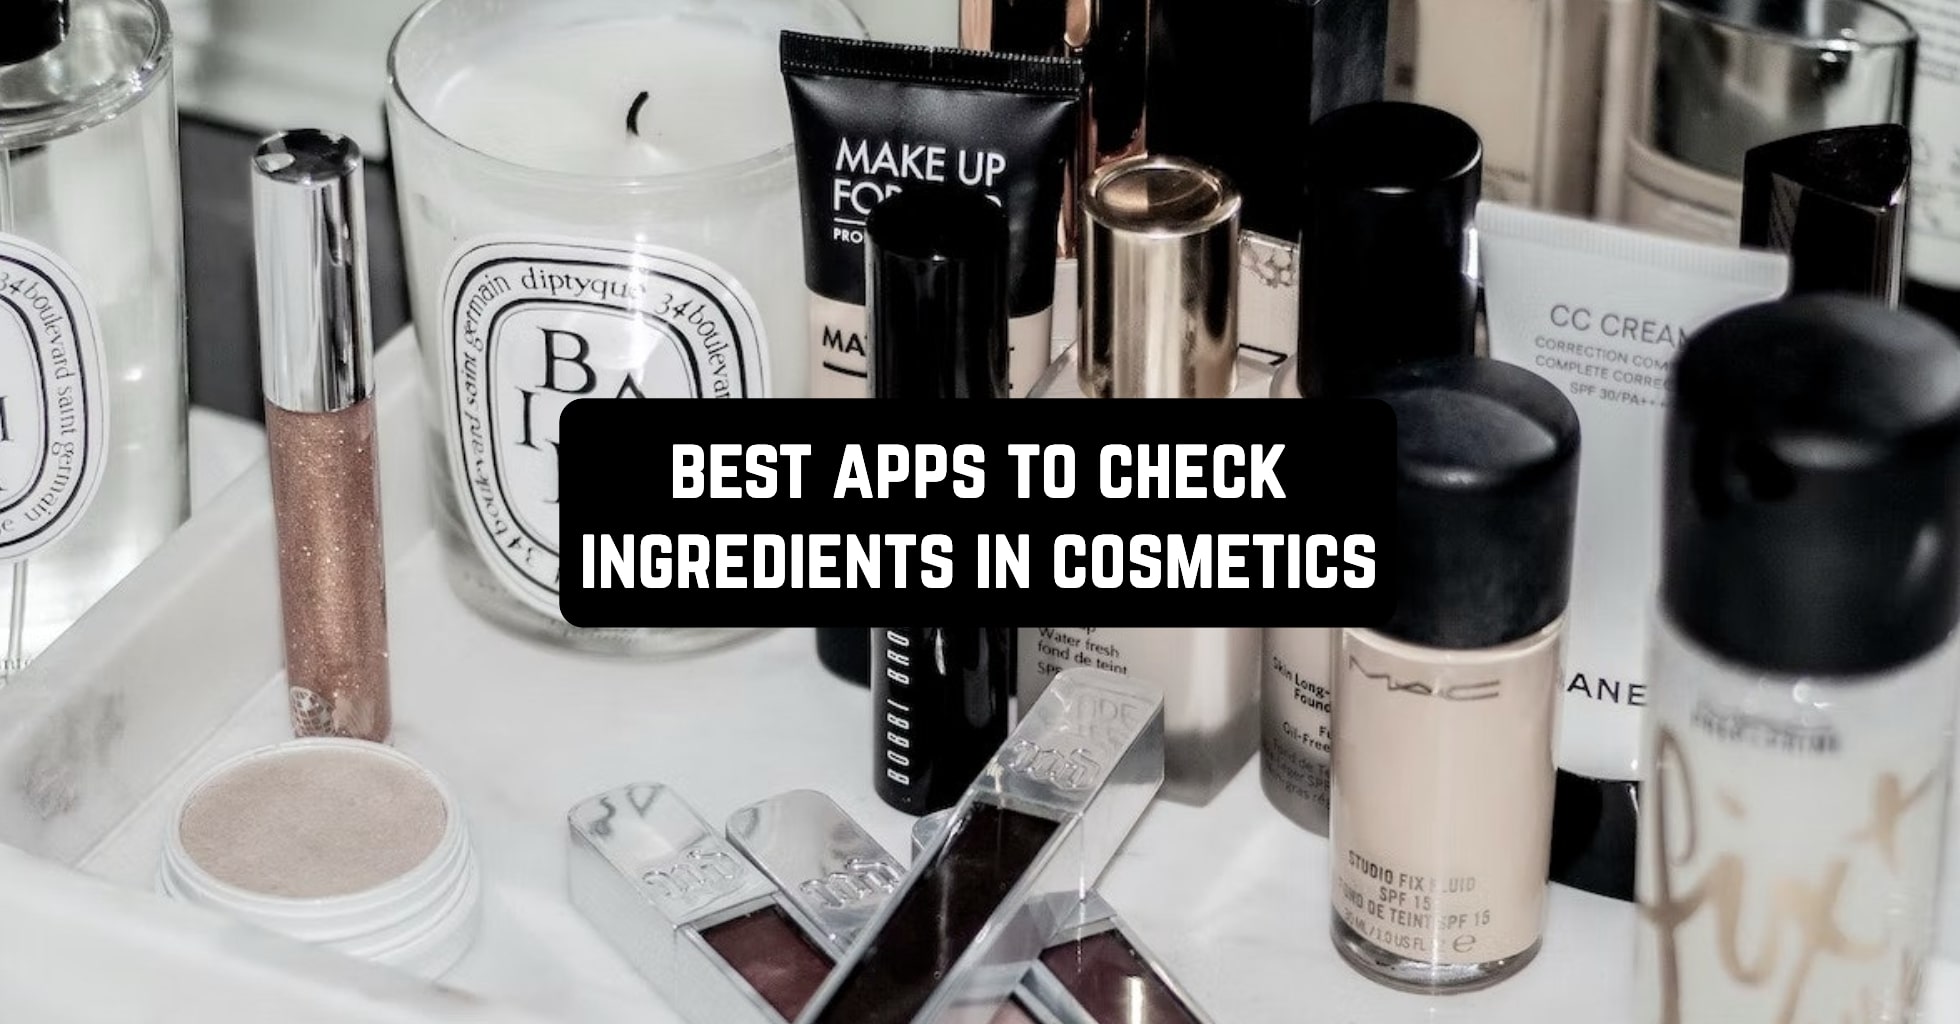 9 Best Apps to Ingredients in Cosmetics | Free apps Android and iOS